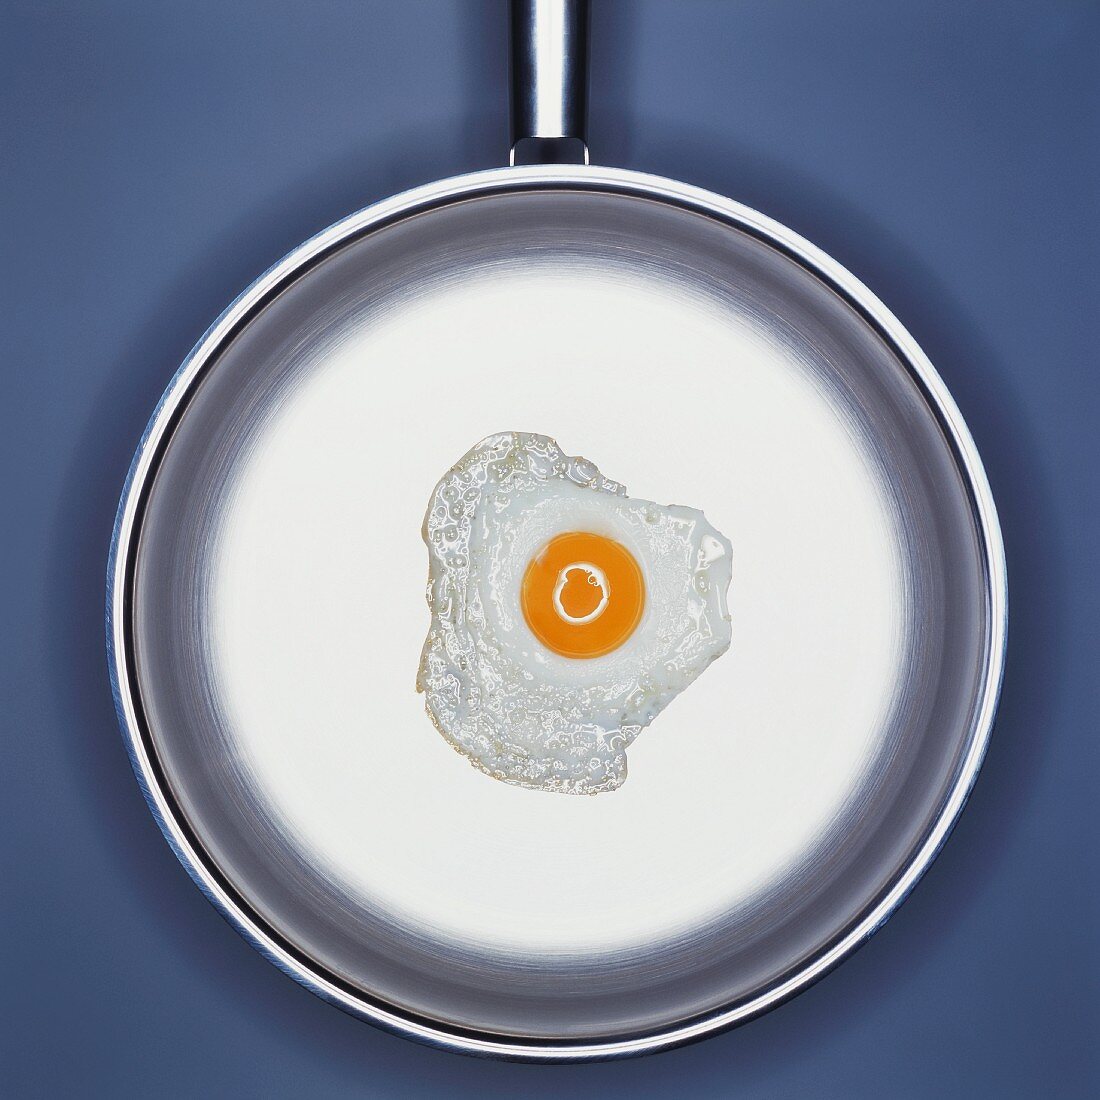 A fried egg in a frying pan (seen from above)